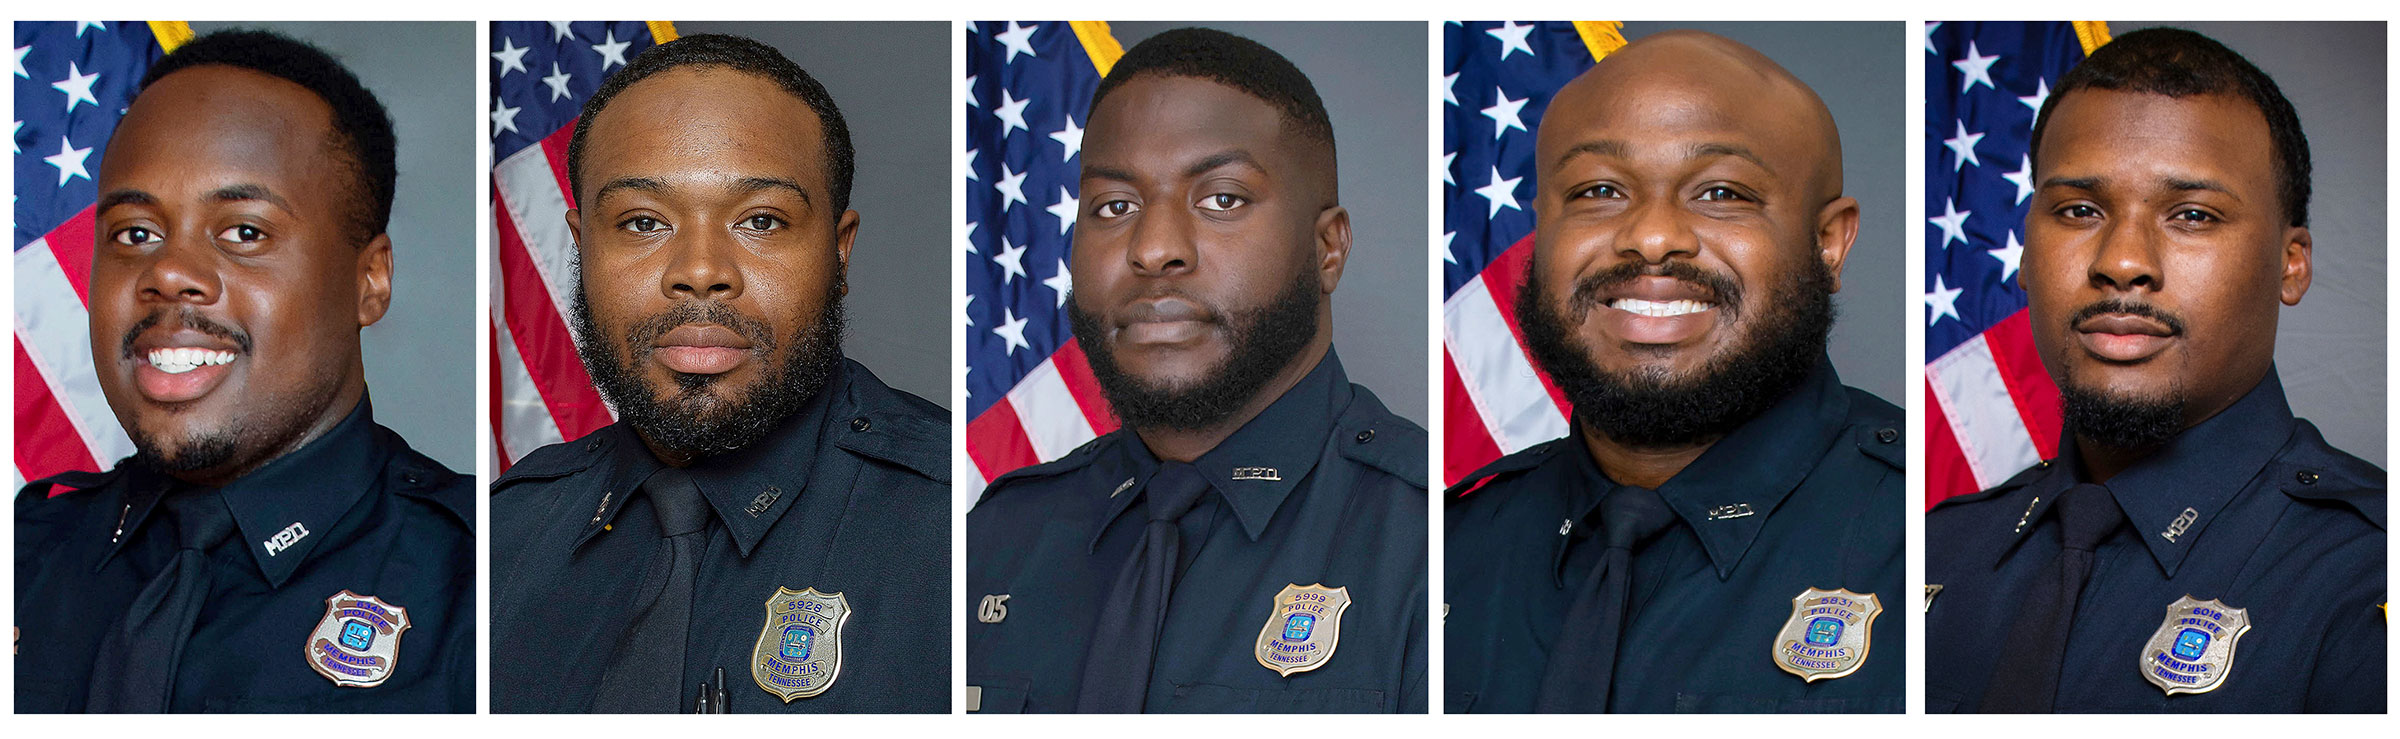 (L to R) Officers Tadarrius Bean, Demetrius Haley, Emmitt Martin III, Desmond Mills, Jr. and Justin Smith. The five former Memphis police officers have been charged with second-degree murder and other crimes in the arrest and death of Tyre Nichols. (Memphis Police Department/AP)